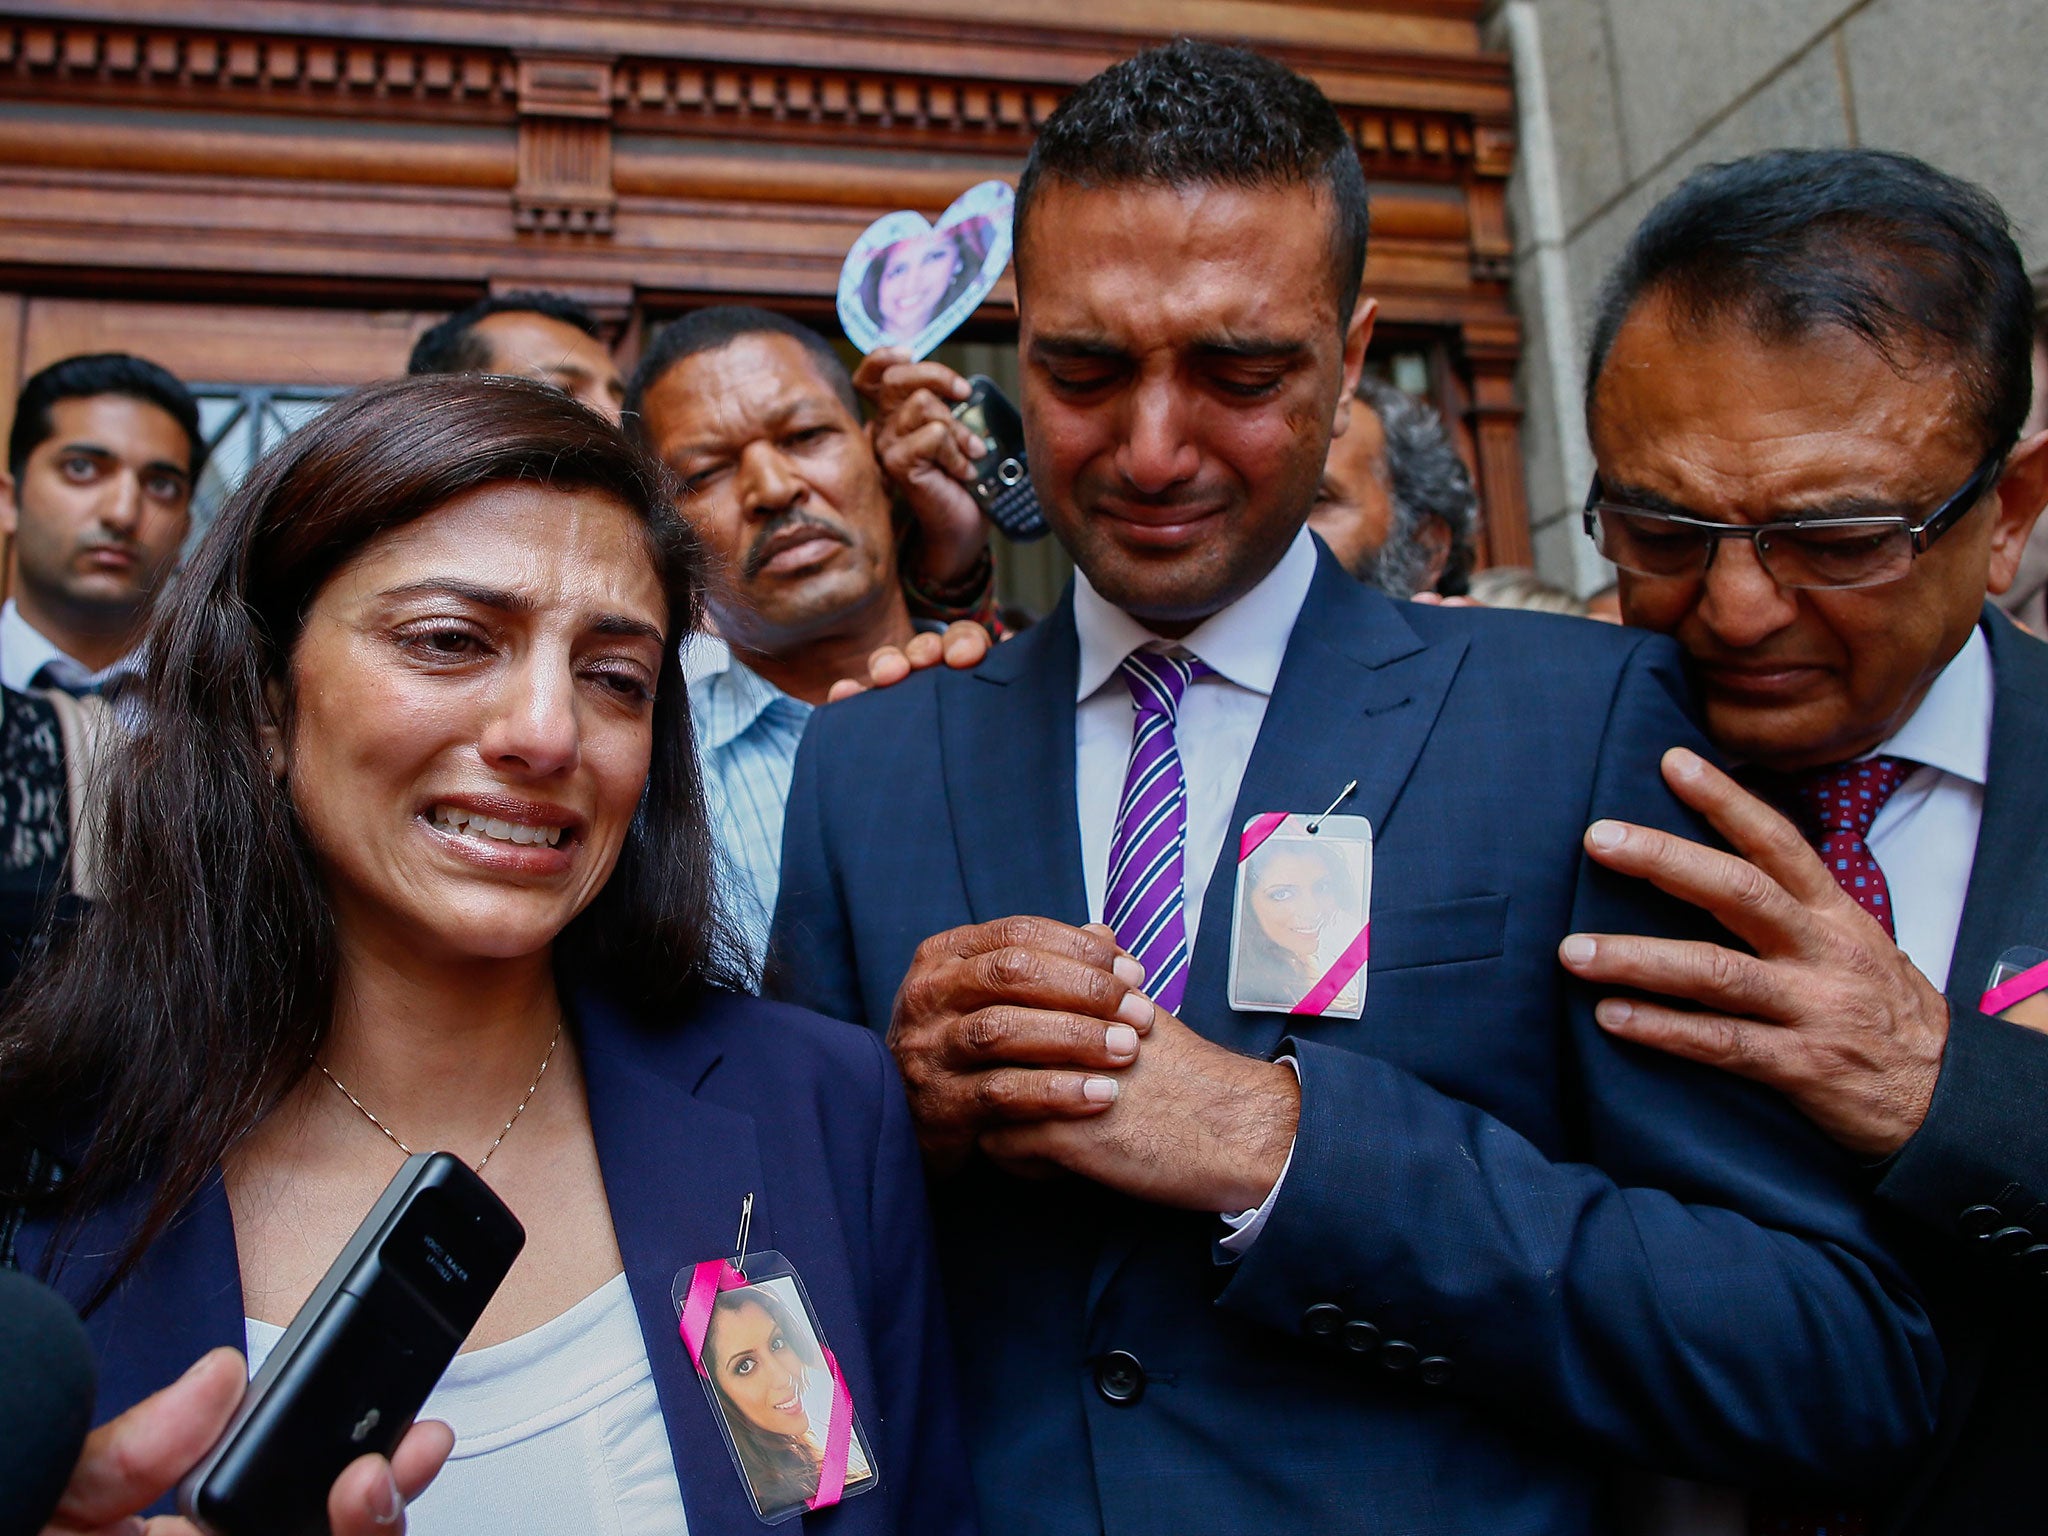 Anni Dewani's family said there were unanswered questions surrounding her death